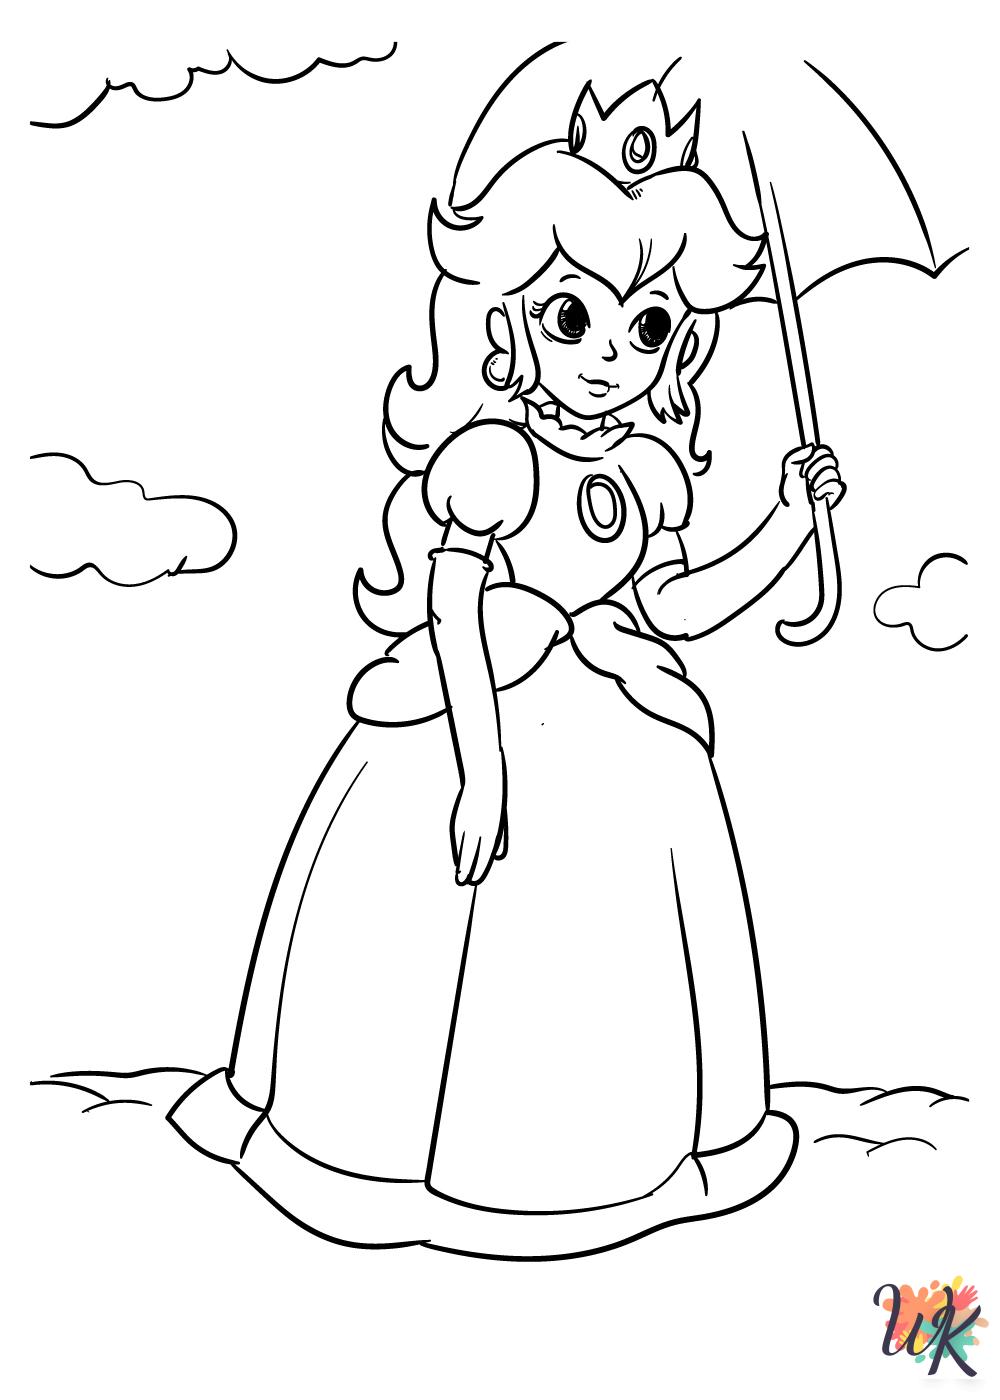 Princess Peach themed coloring pages 1